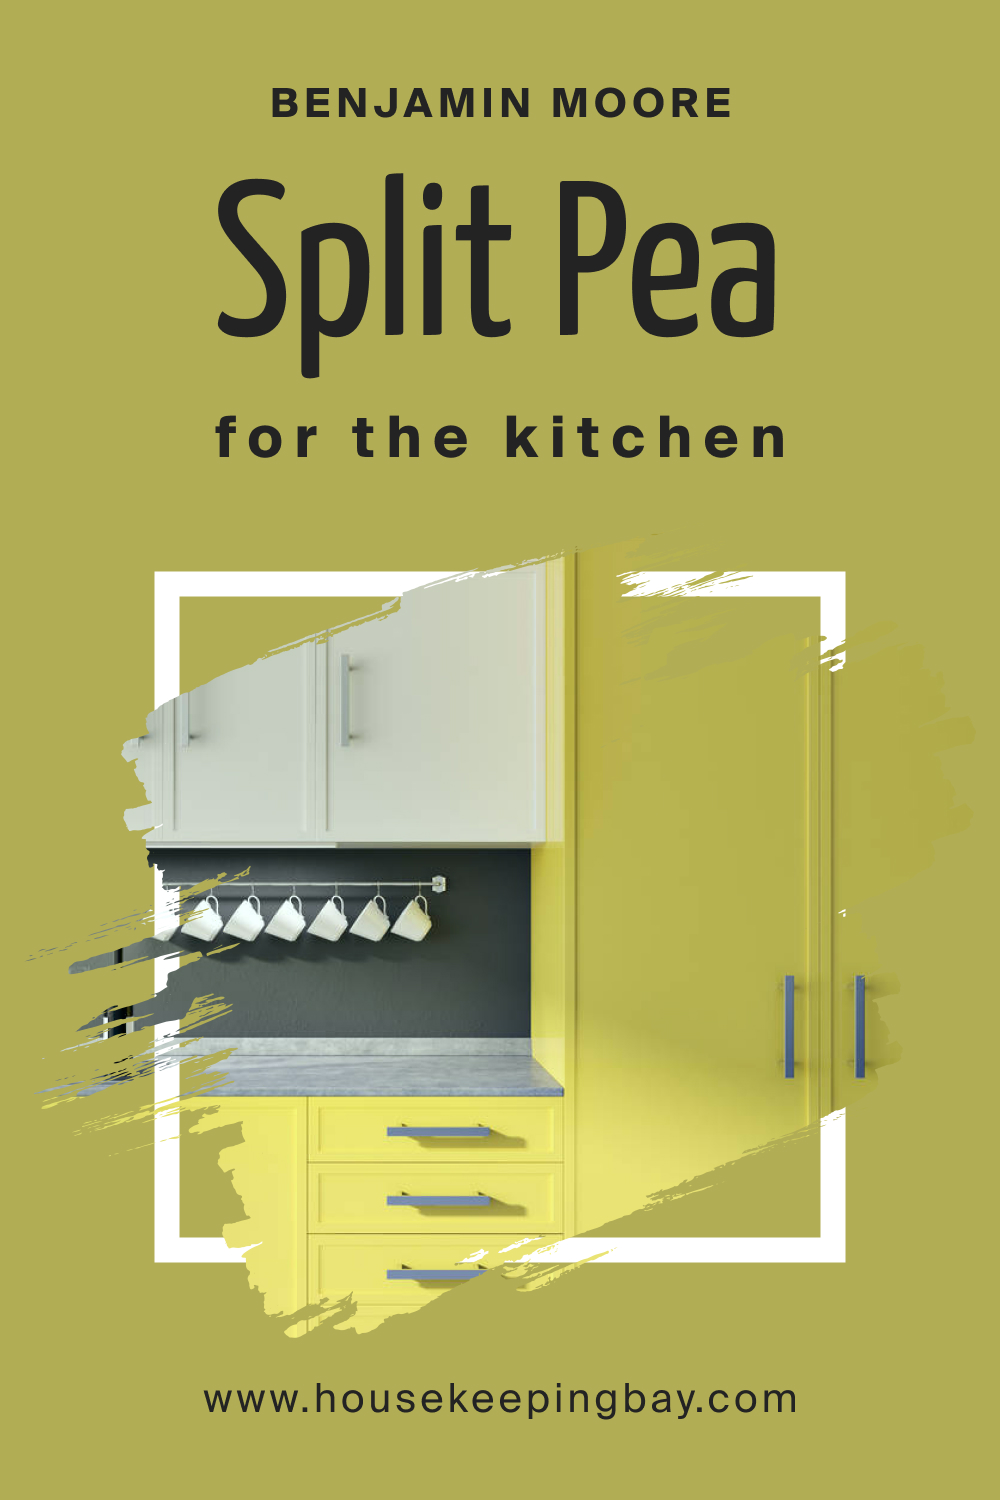 How to Use Split Pea 2146-30 in the Kitchen?